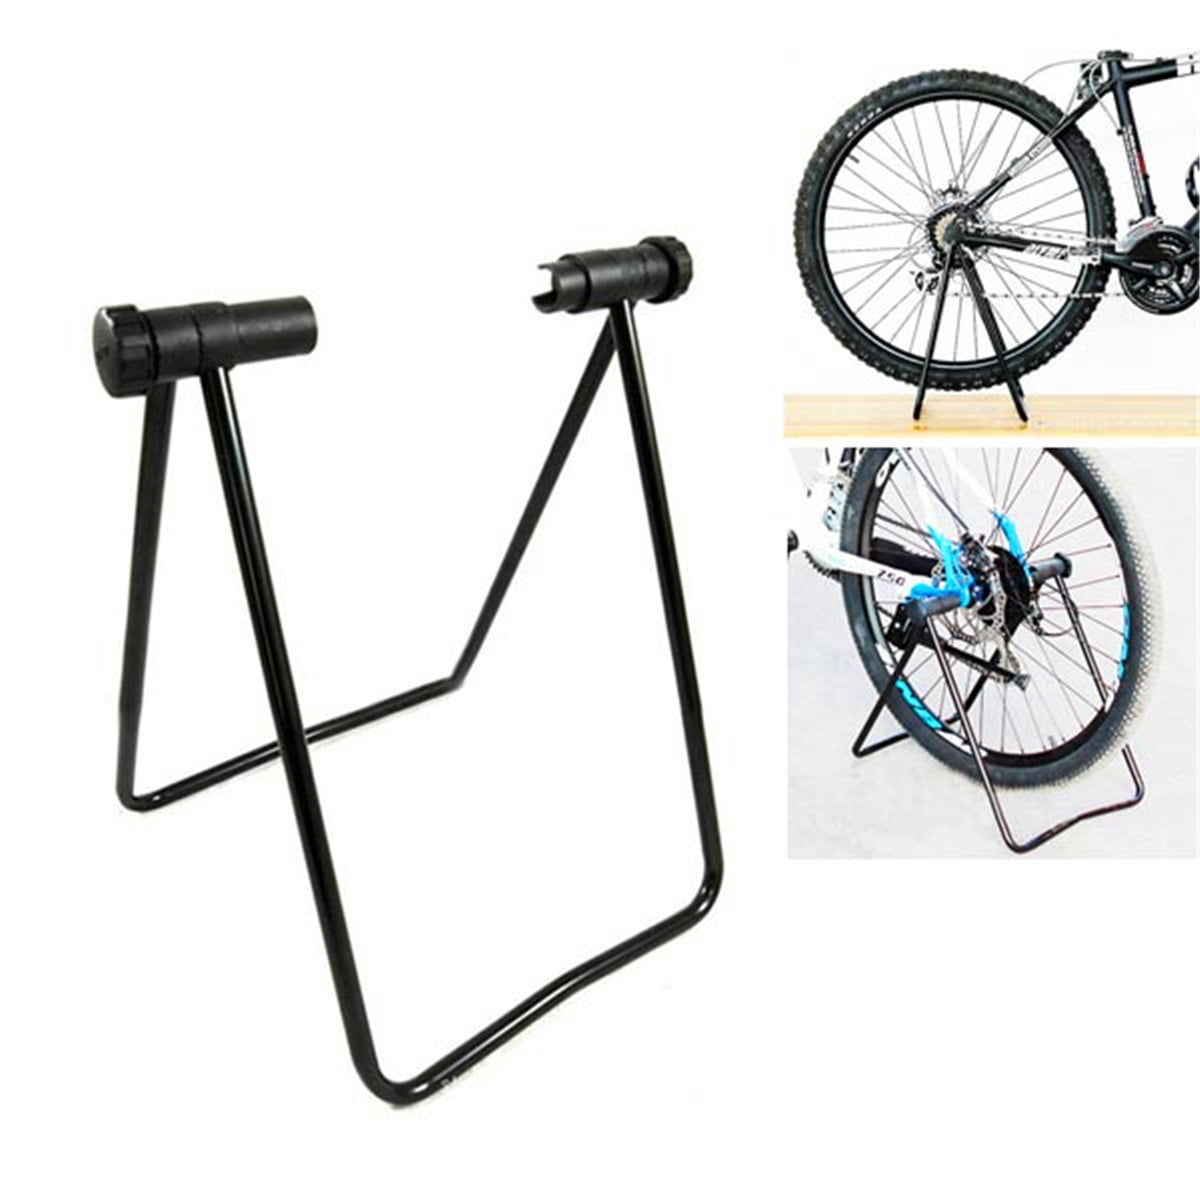 Adjustable Height Bracket Malbaba Easy Utility Bicycle Stand Foldable Mechanic Repair Rack Bike Stand for Bicycle Storage 